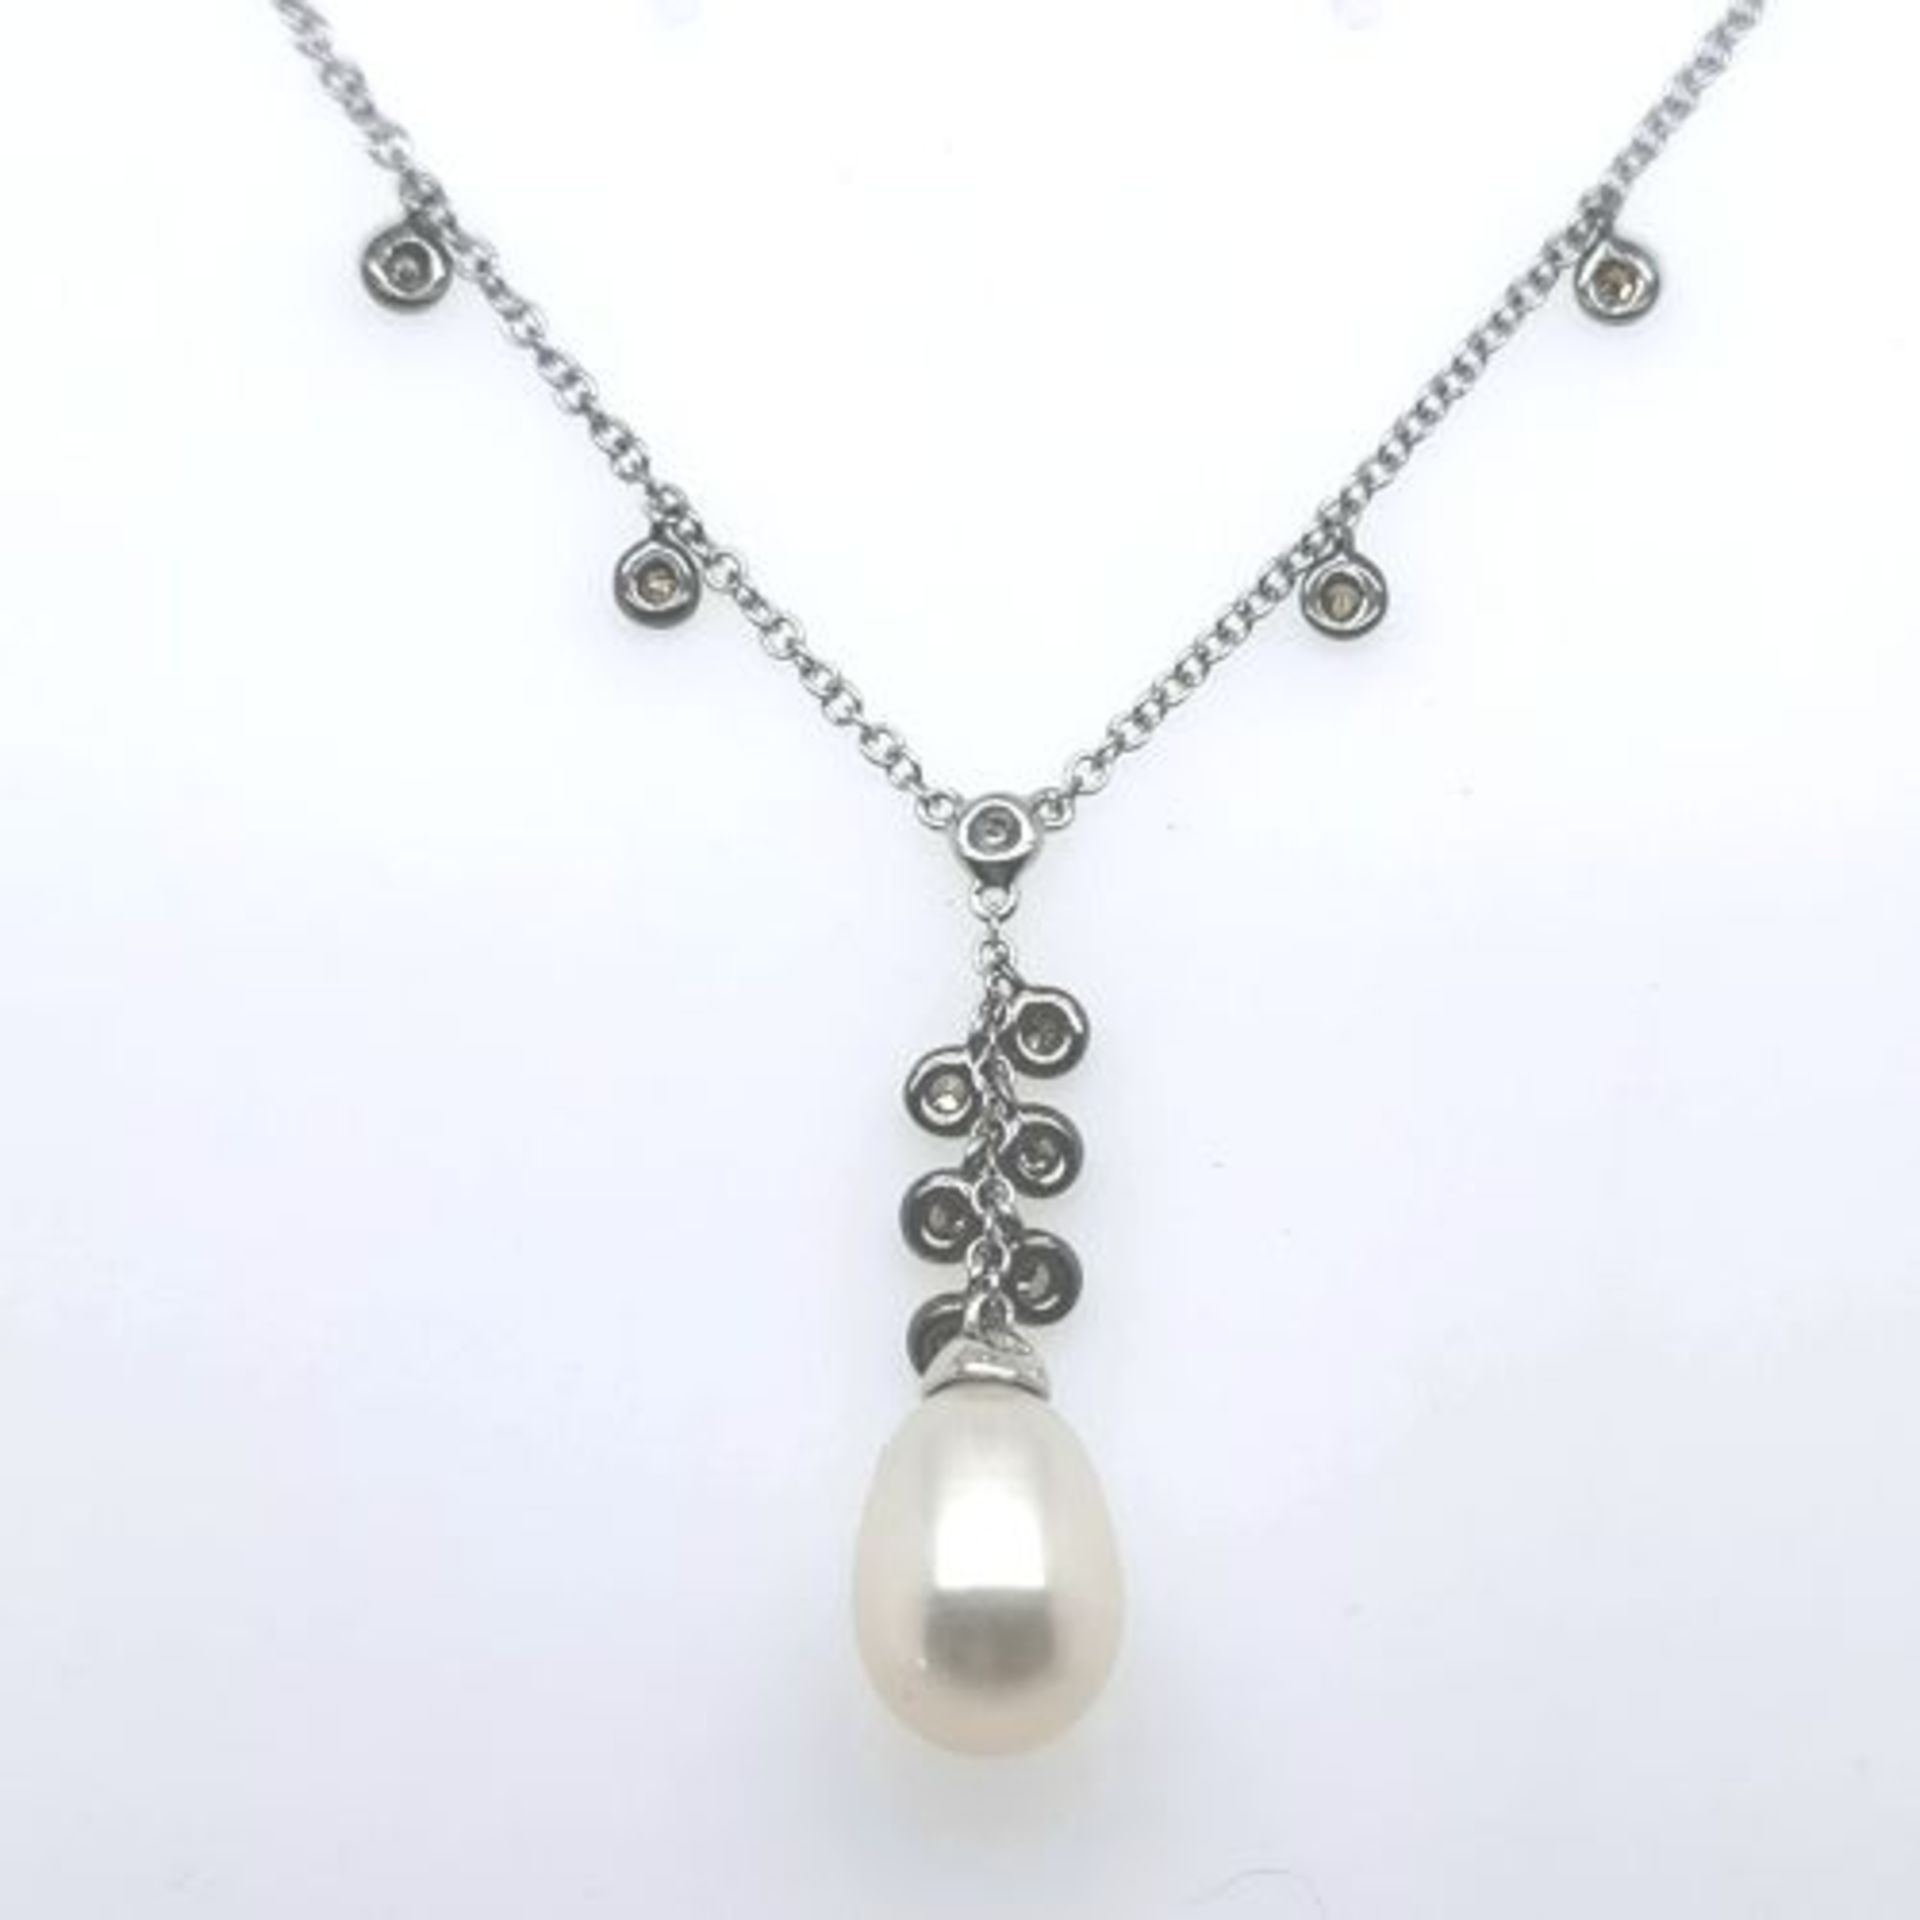 Perl-Collier, 585 WG 4,8